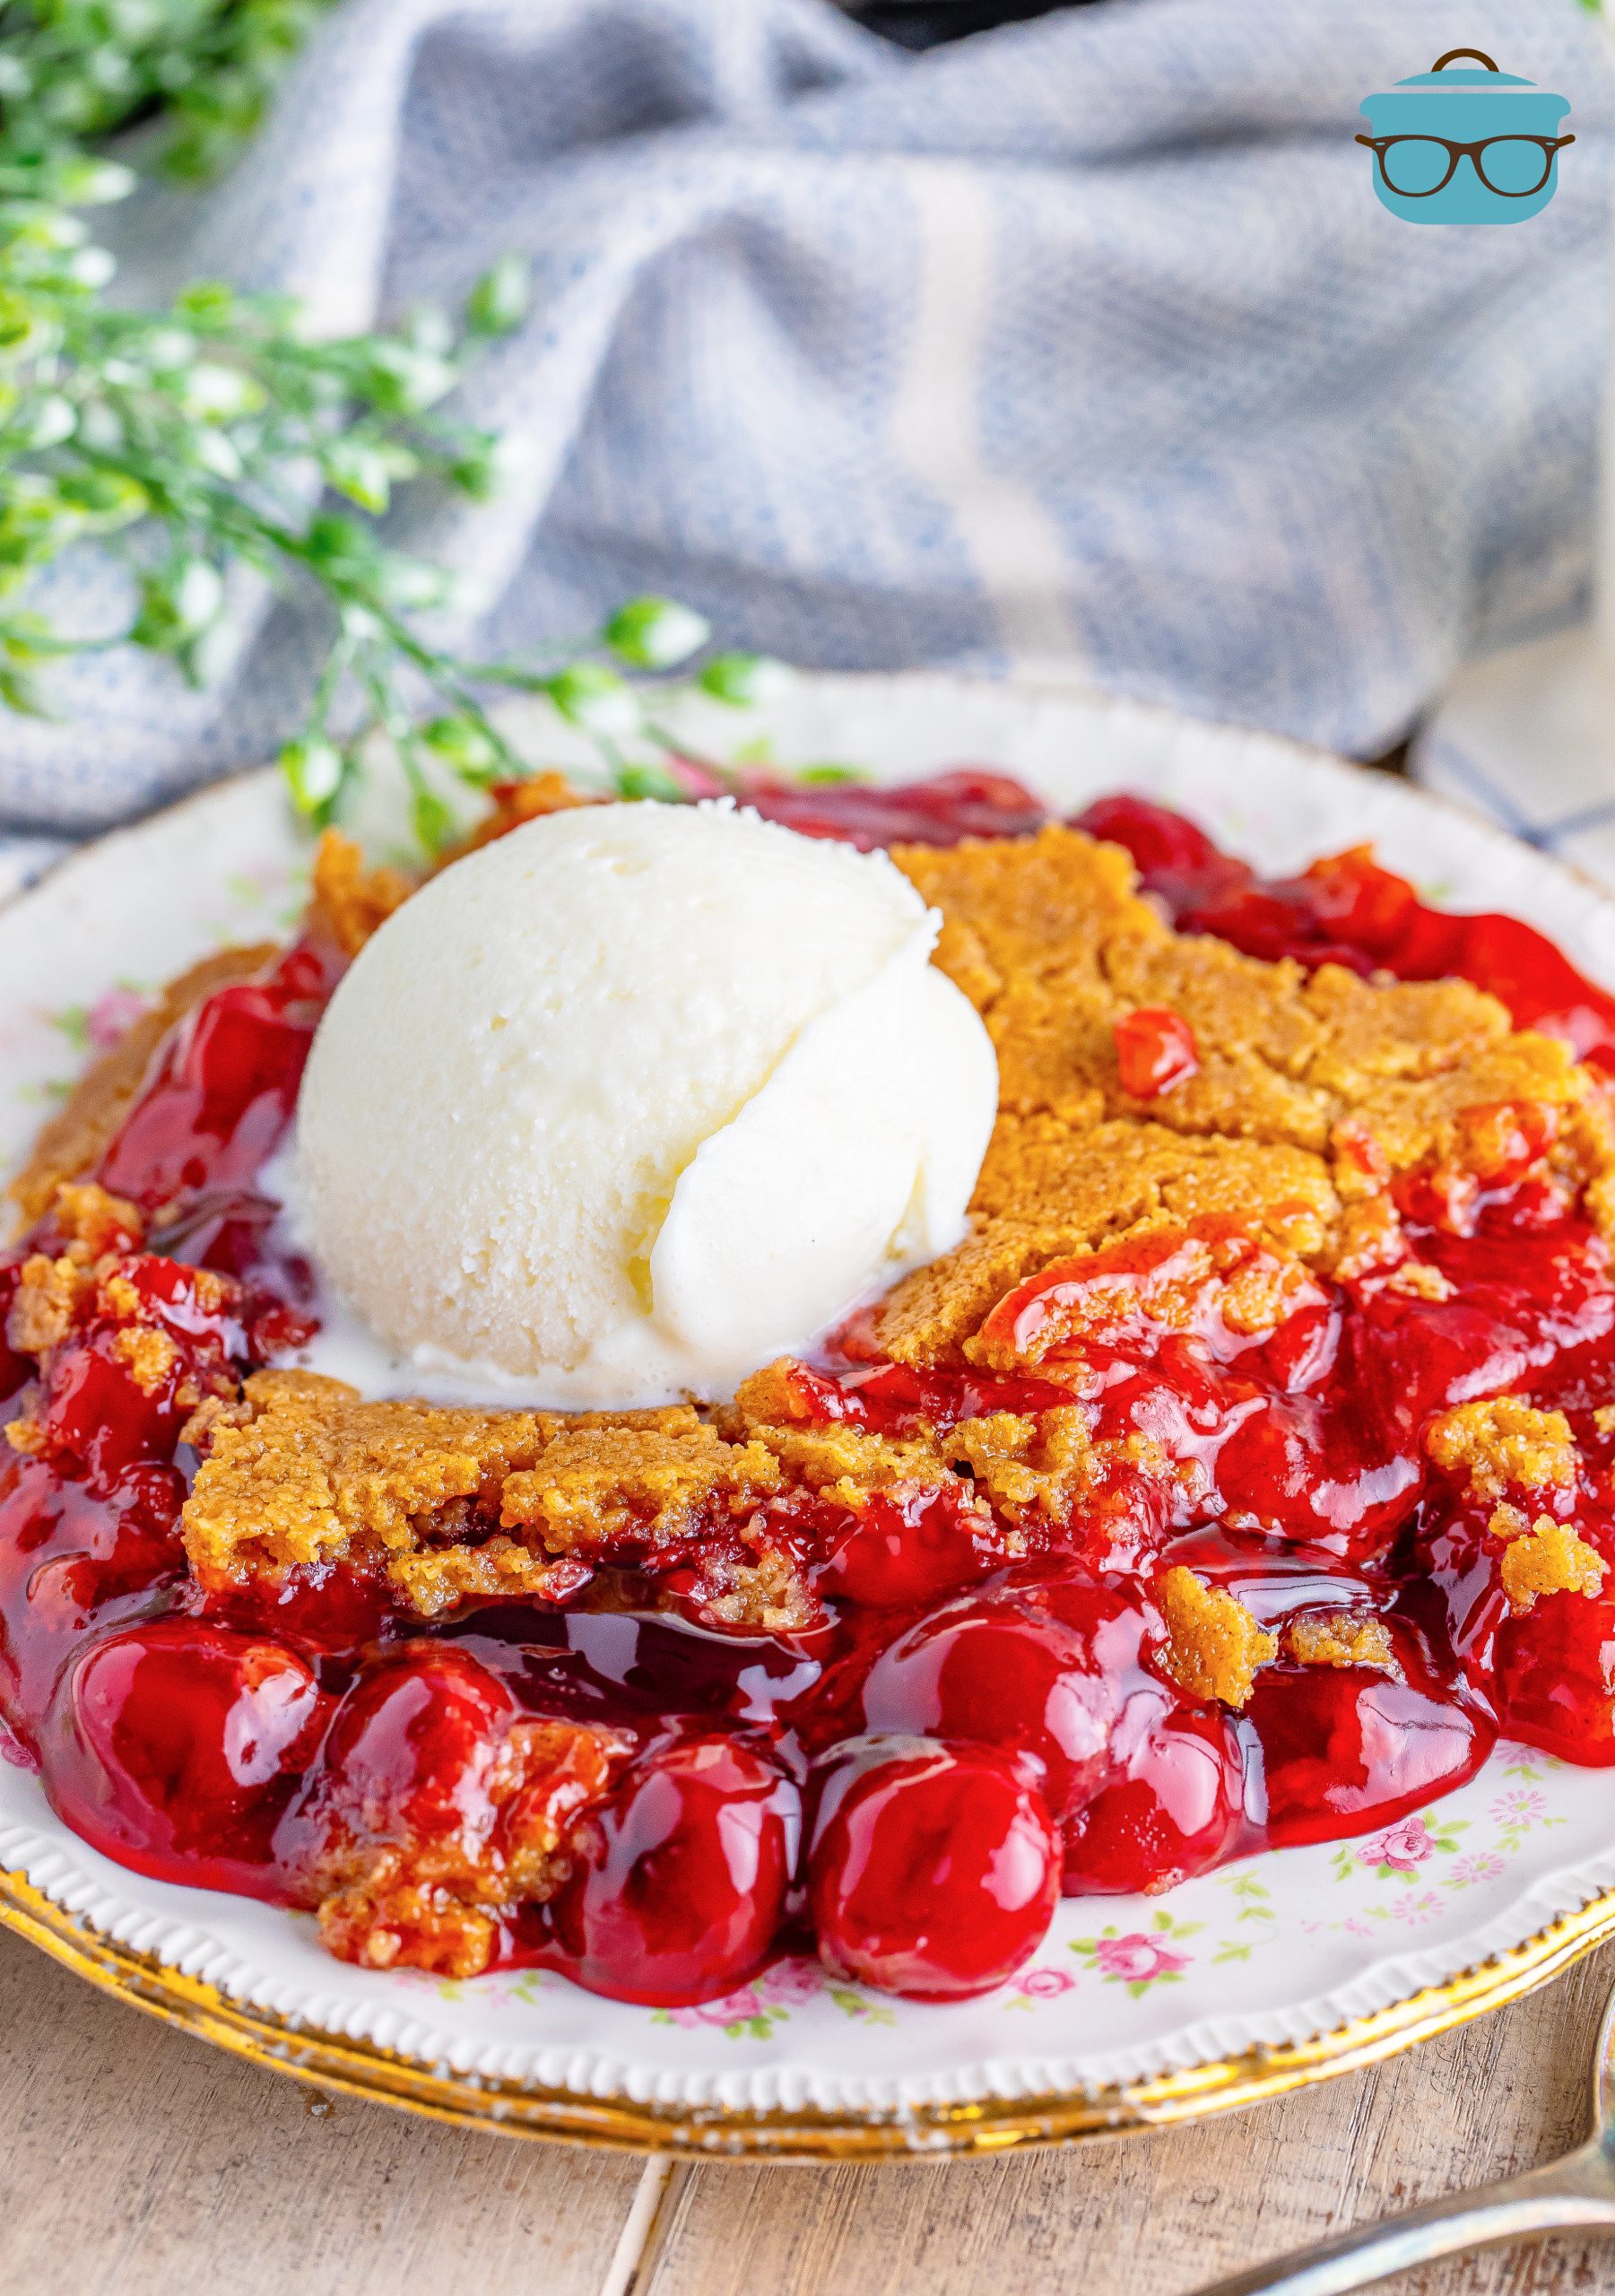 A plate with a large serving of Jiffy Cherry Cobbler and a scoop of ice cream.